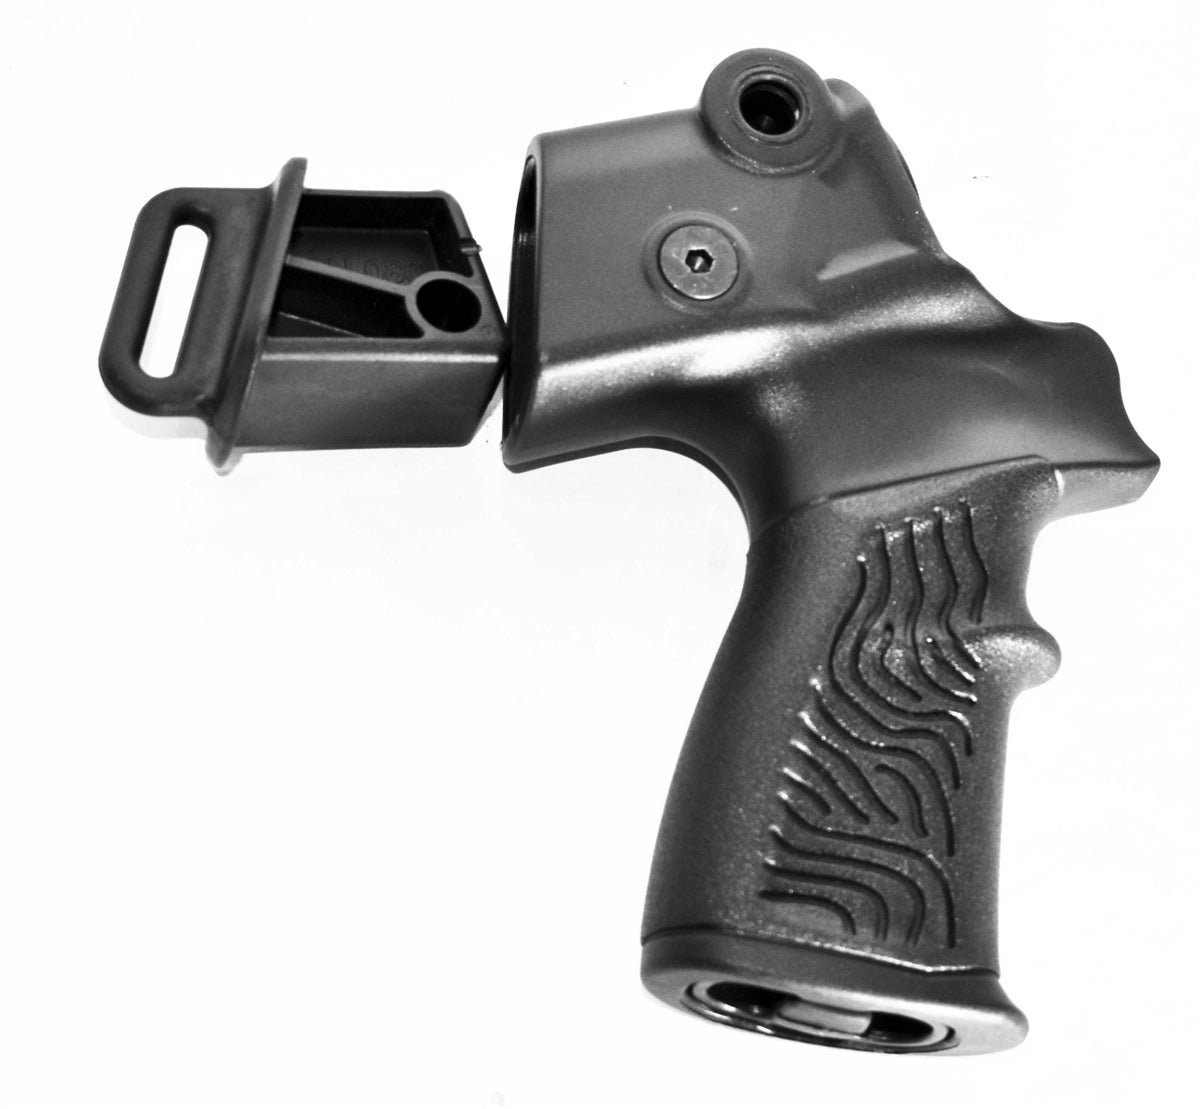 Mossberg 590 Shockwave 12 Gauge Rear Grip Home Defense Tactical Hunting Accessory. - TRINITY SUPPLY INC